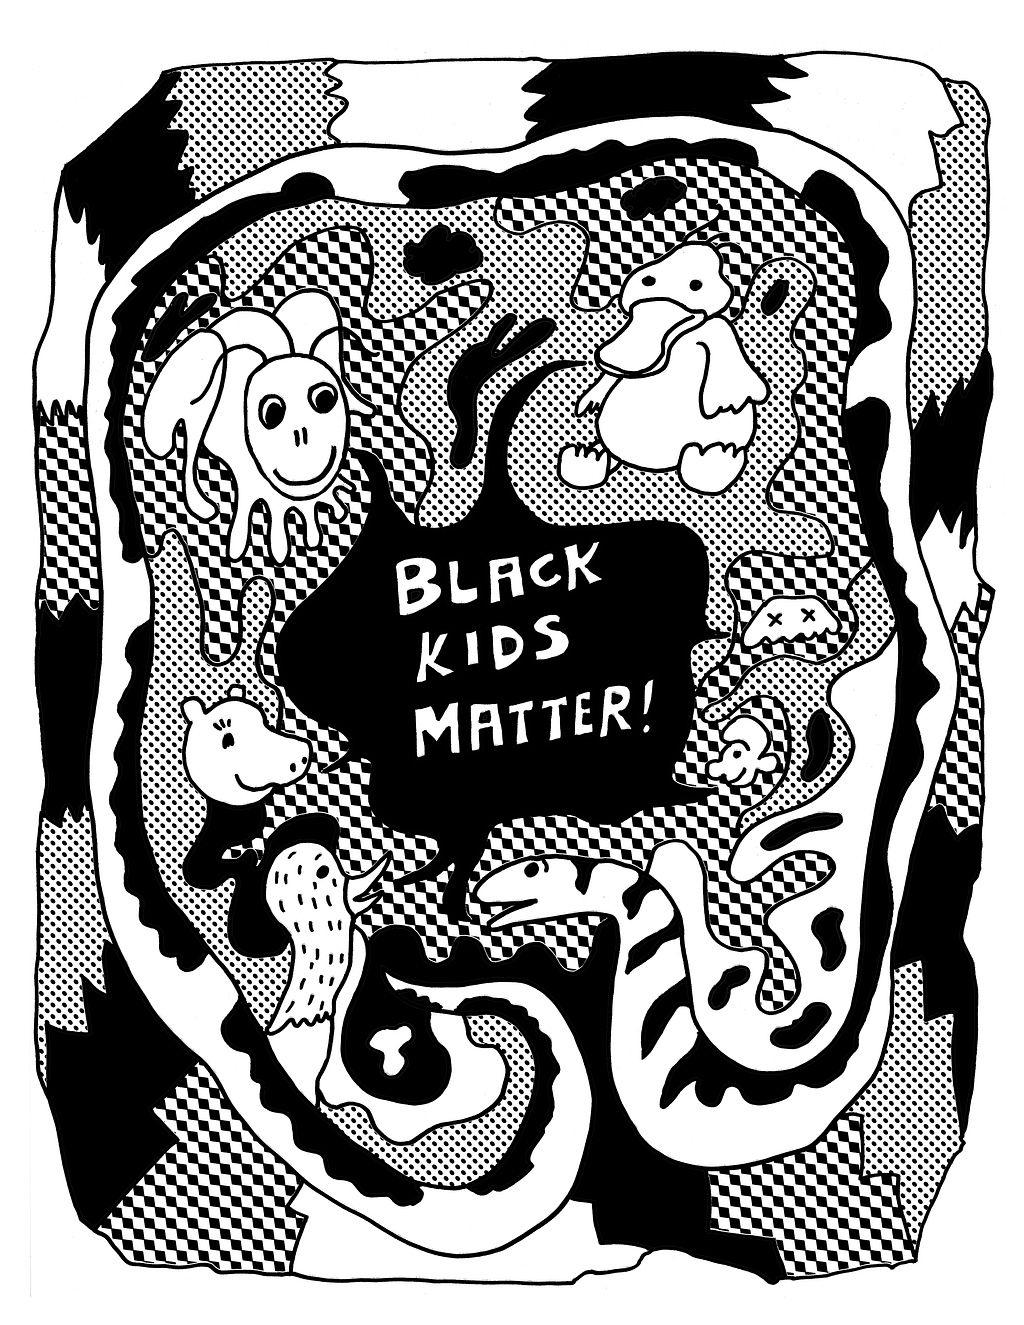 Half-tone drawing with text, “Black Kids Matter!”